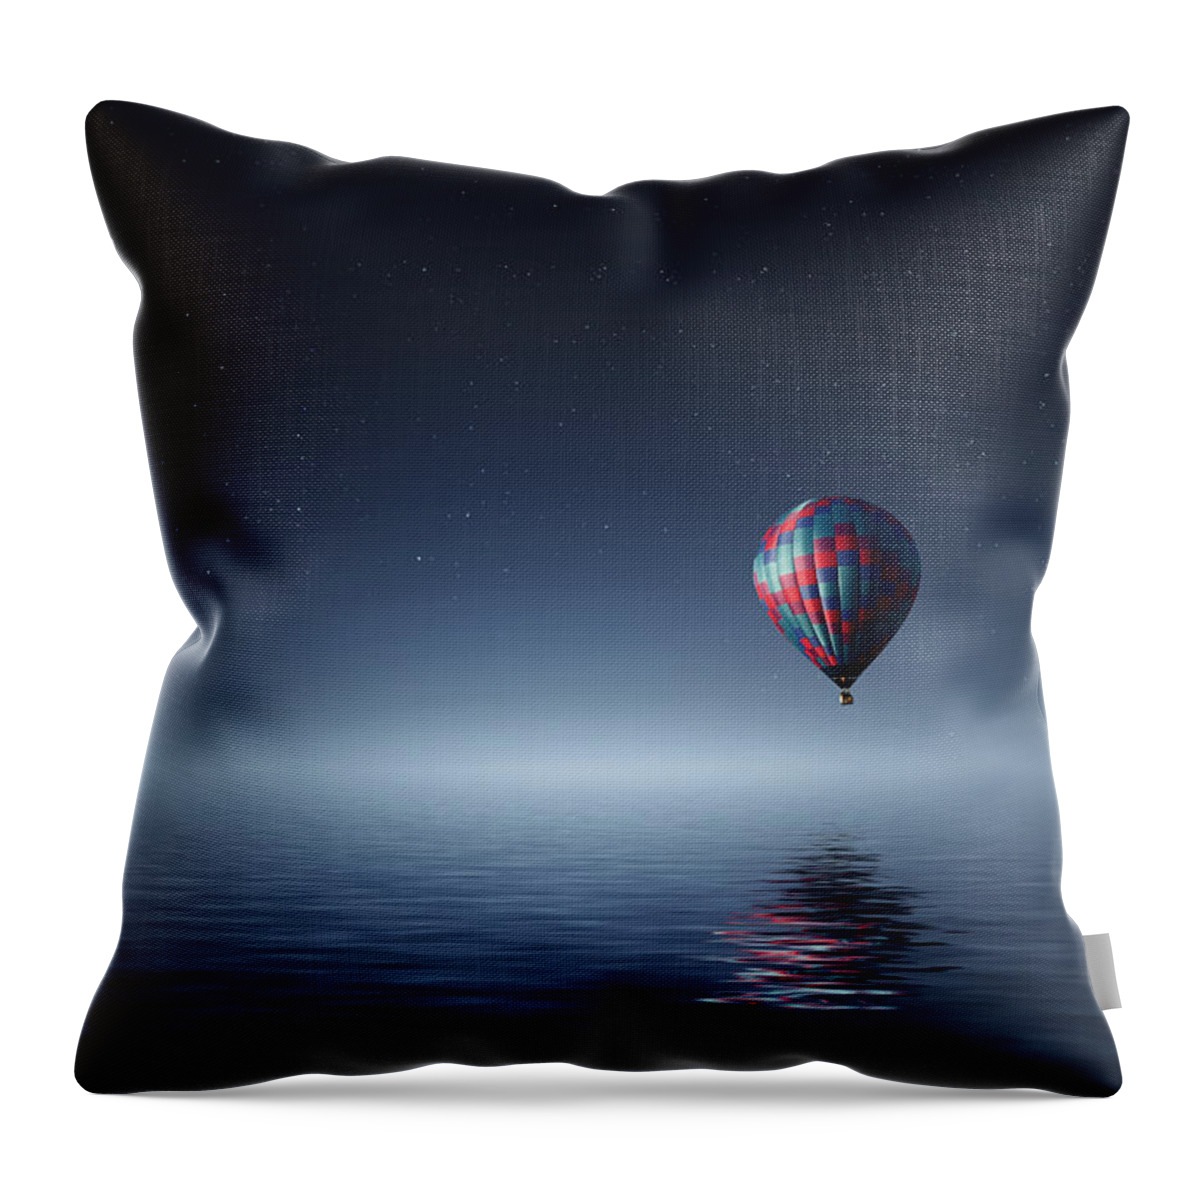 Above Throw Pillow featuring the photograph One by Bess Hamiti